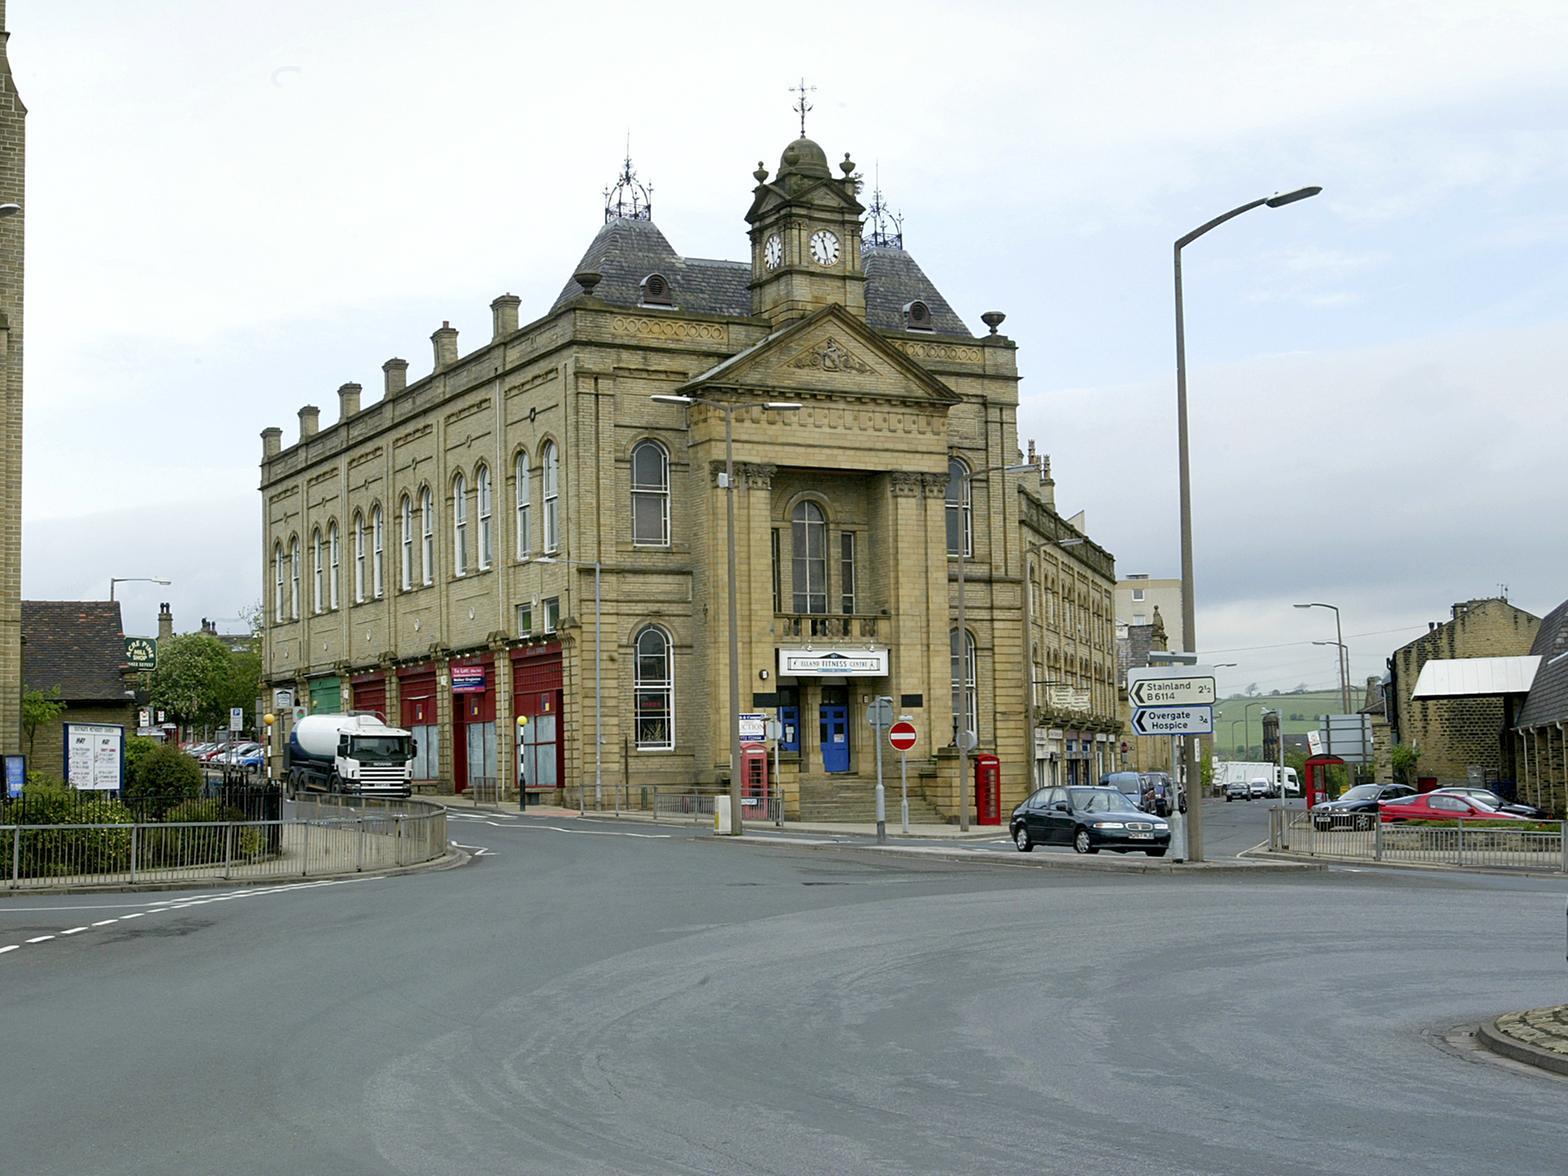 Elland Town Hall is a grade II Listed Building built in 1887 and over the years it has been used as a public hall, cinema, snooker club and bingo hall.